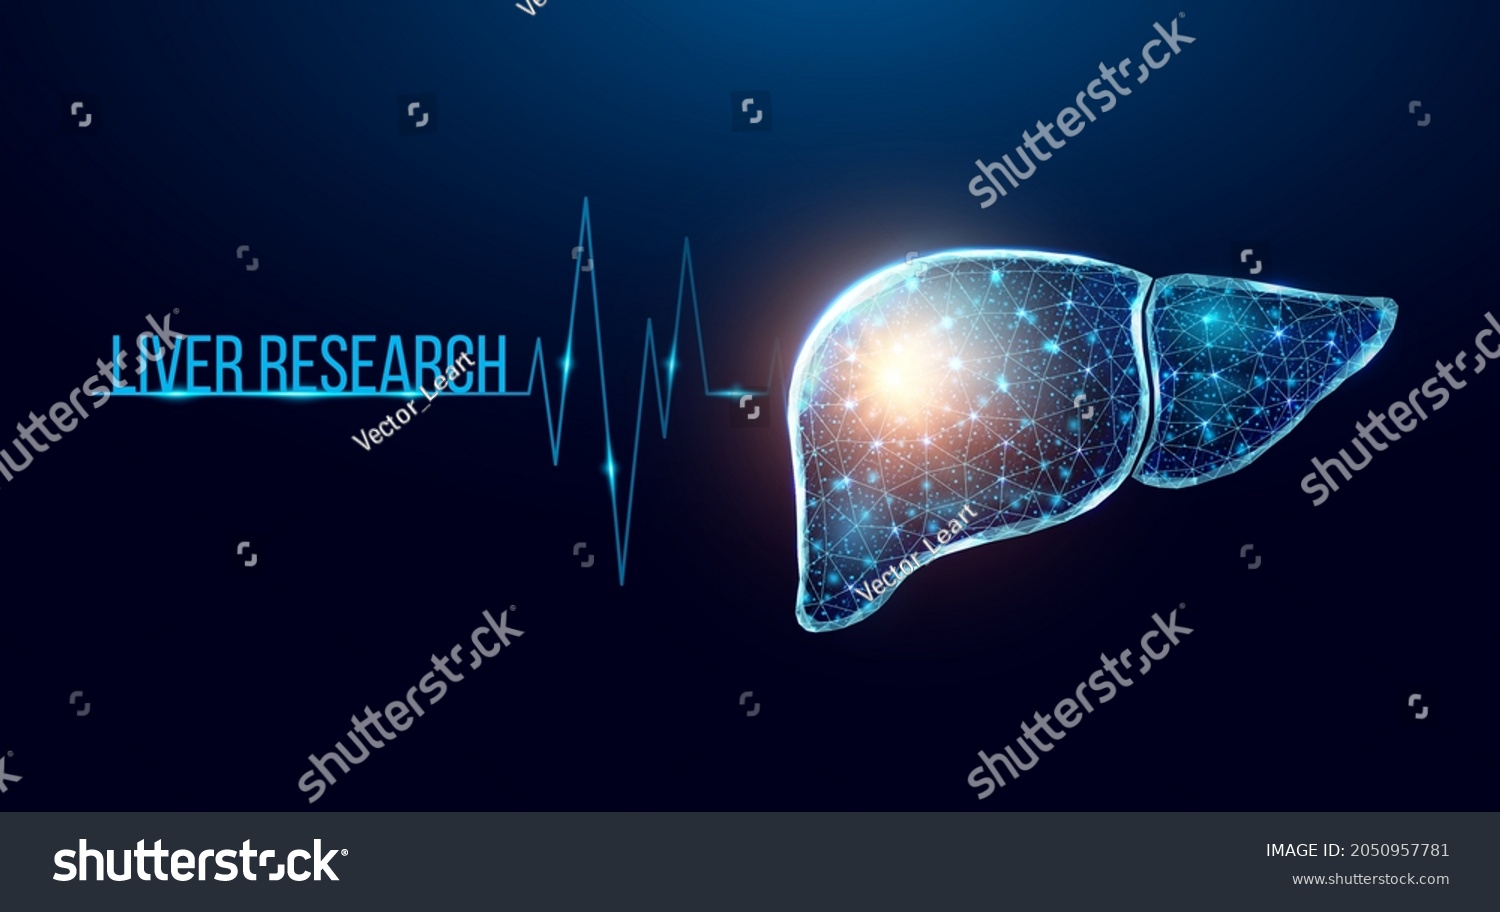 SVG of Human liver research. Wireframe low poly style. Concept for medical, pharmacology, treatment of the hepatitis. Abstract modern 3d vector illustration on dark blue background. svg